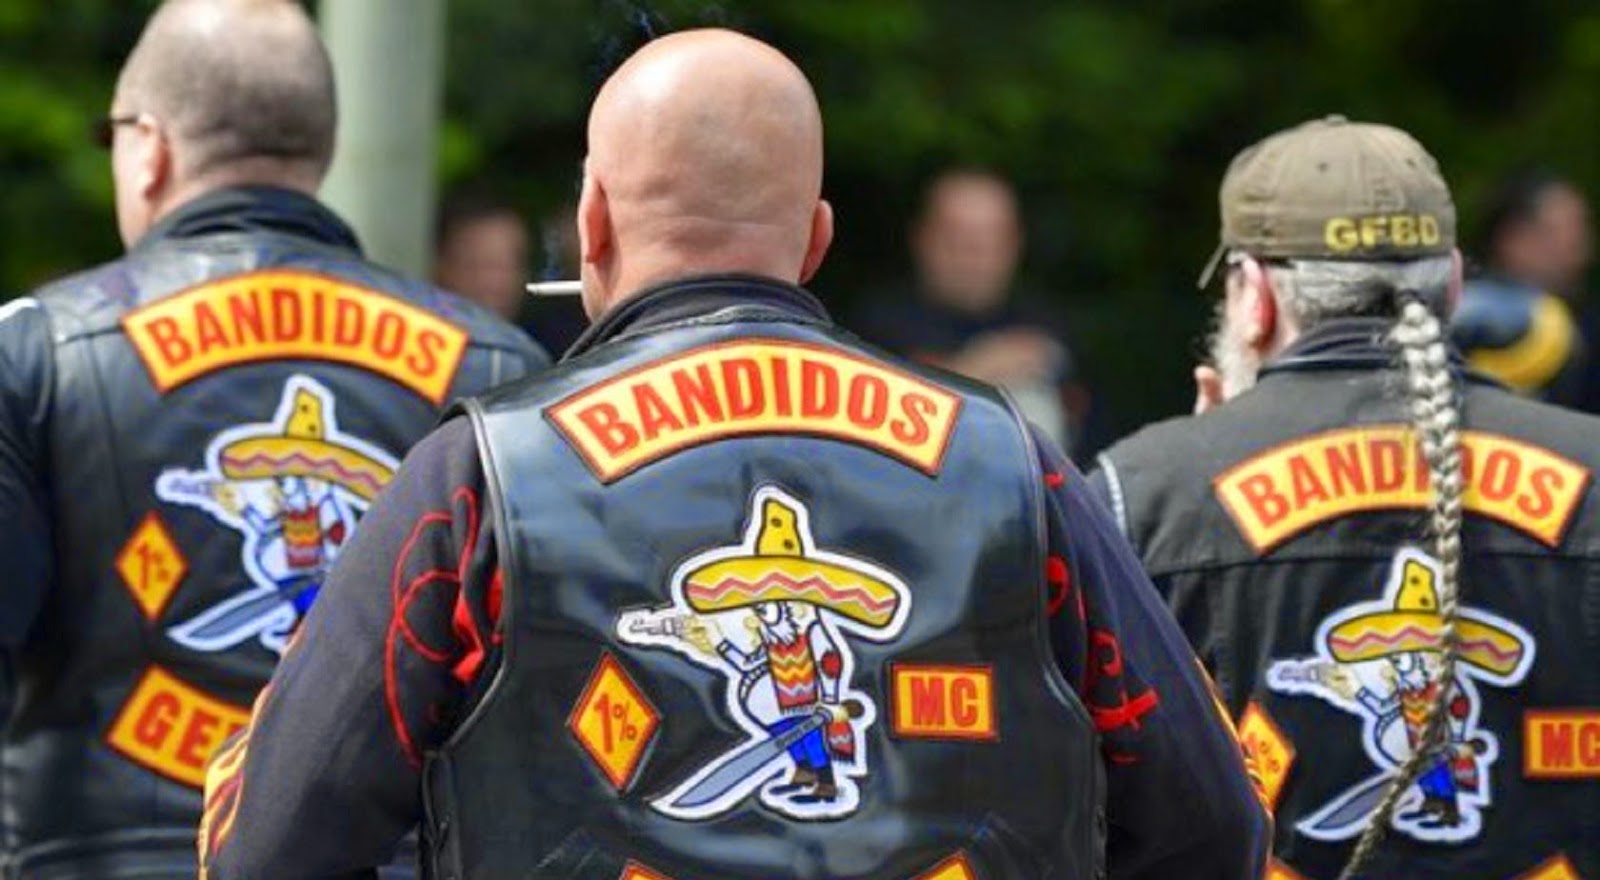 motorcycle-event-news-bandidos-nation-in-the-news-in-albuquerque-and